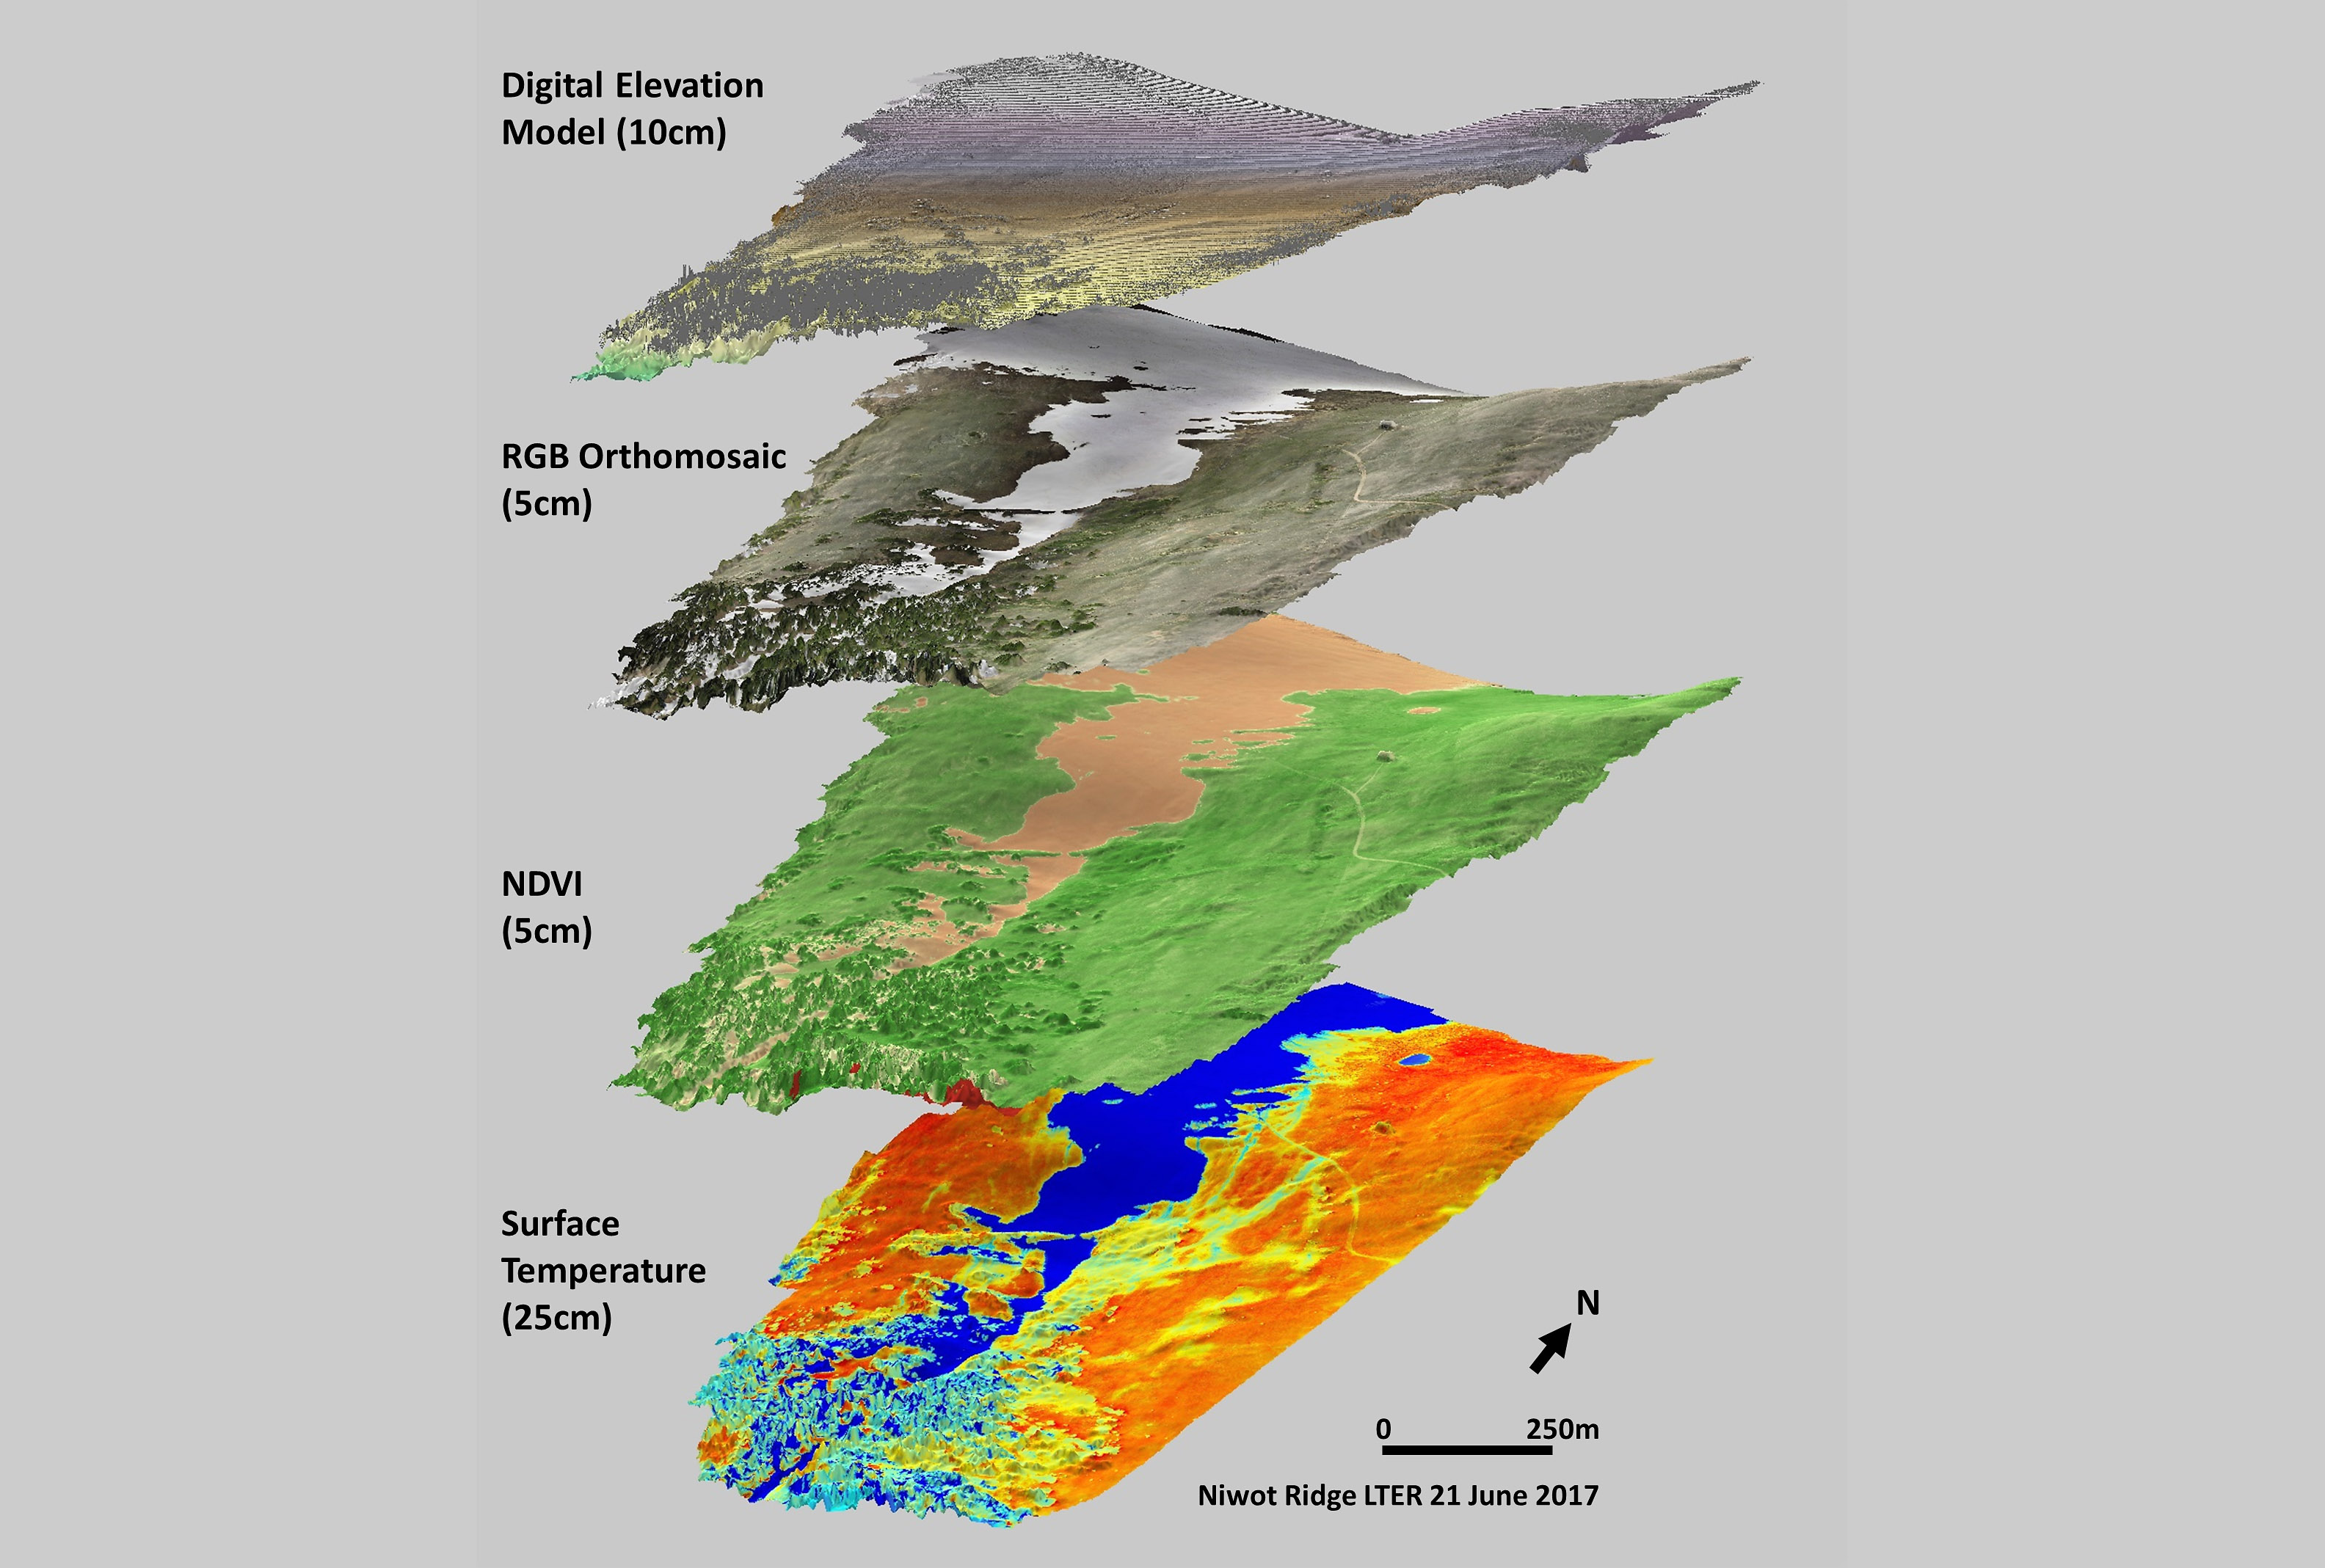 image layers derived from drone-based multispectral imaging